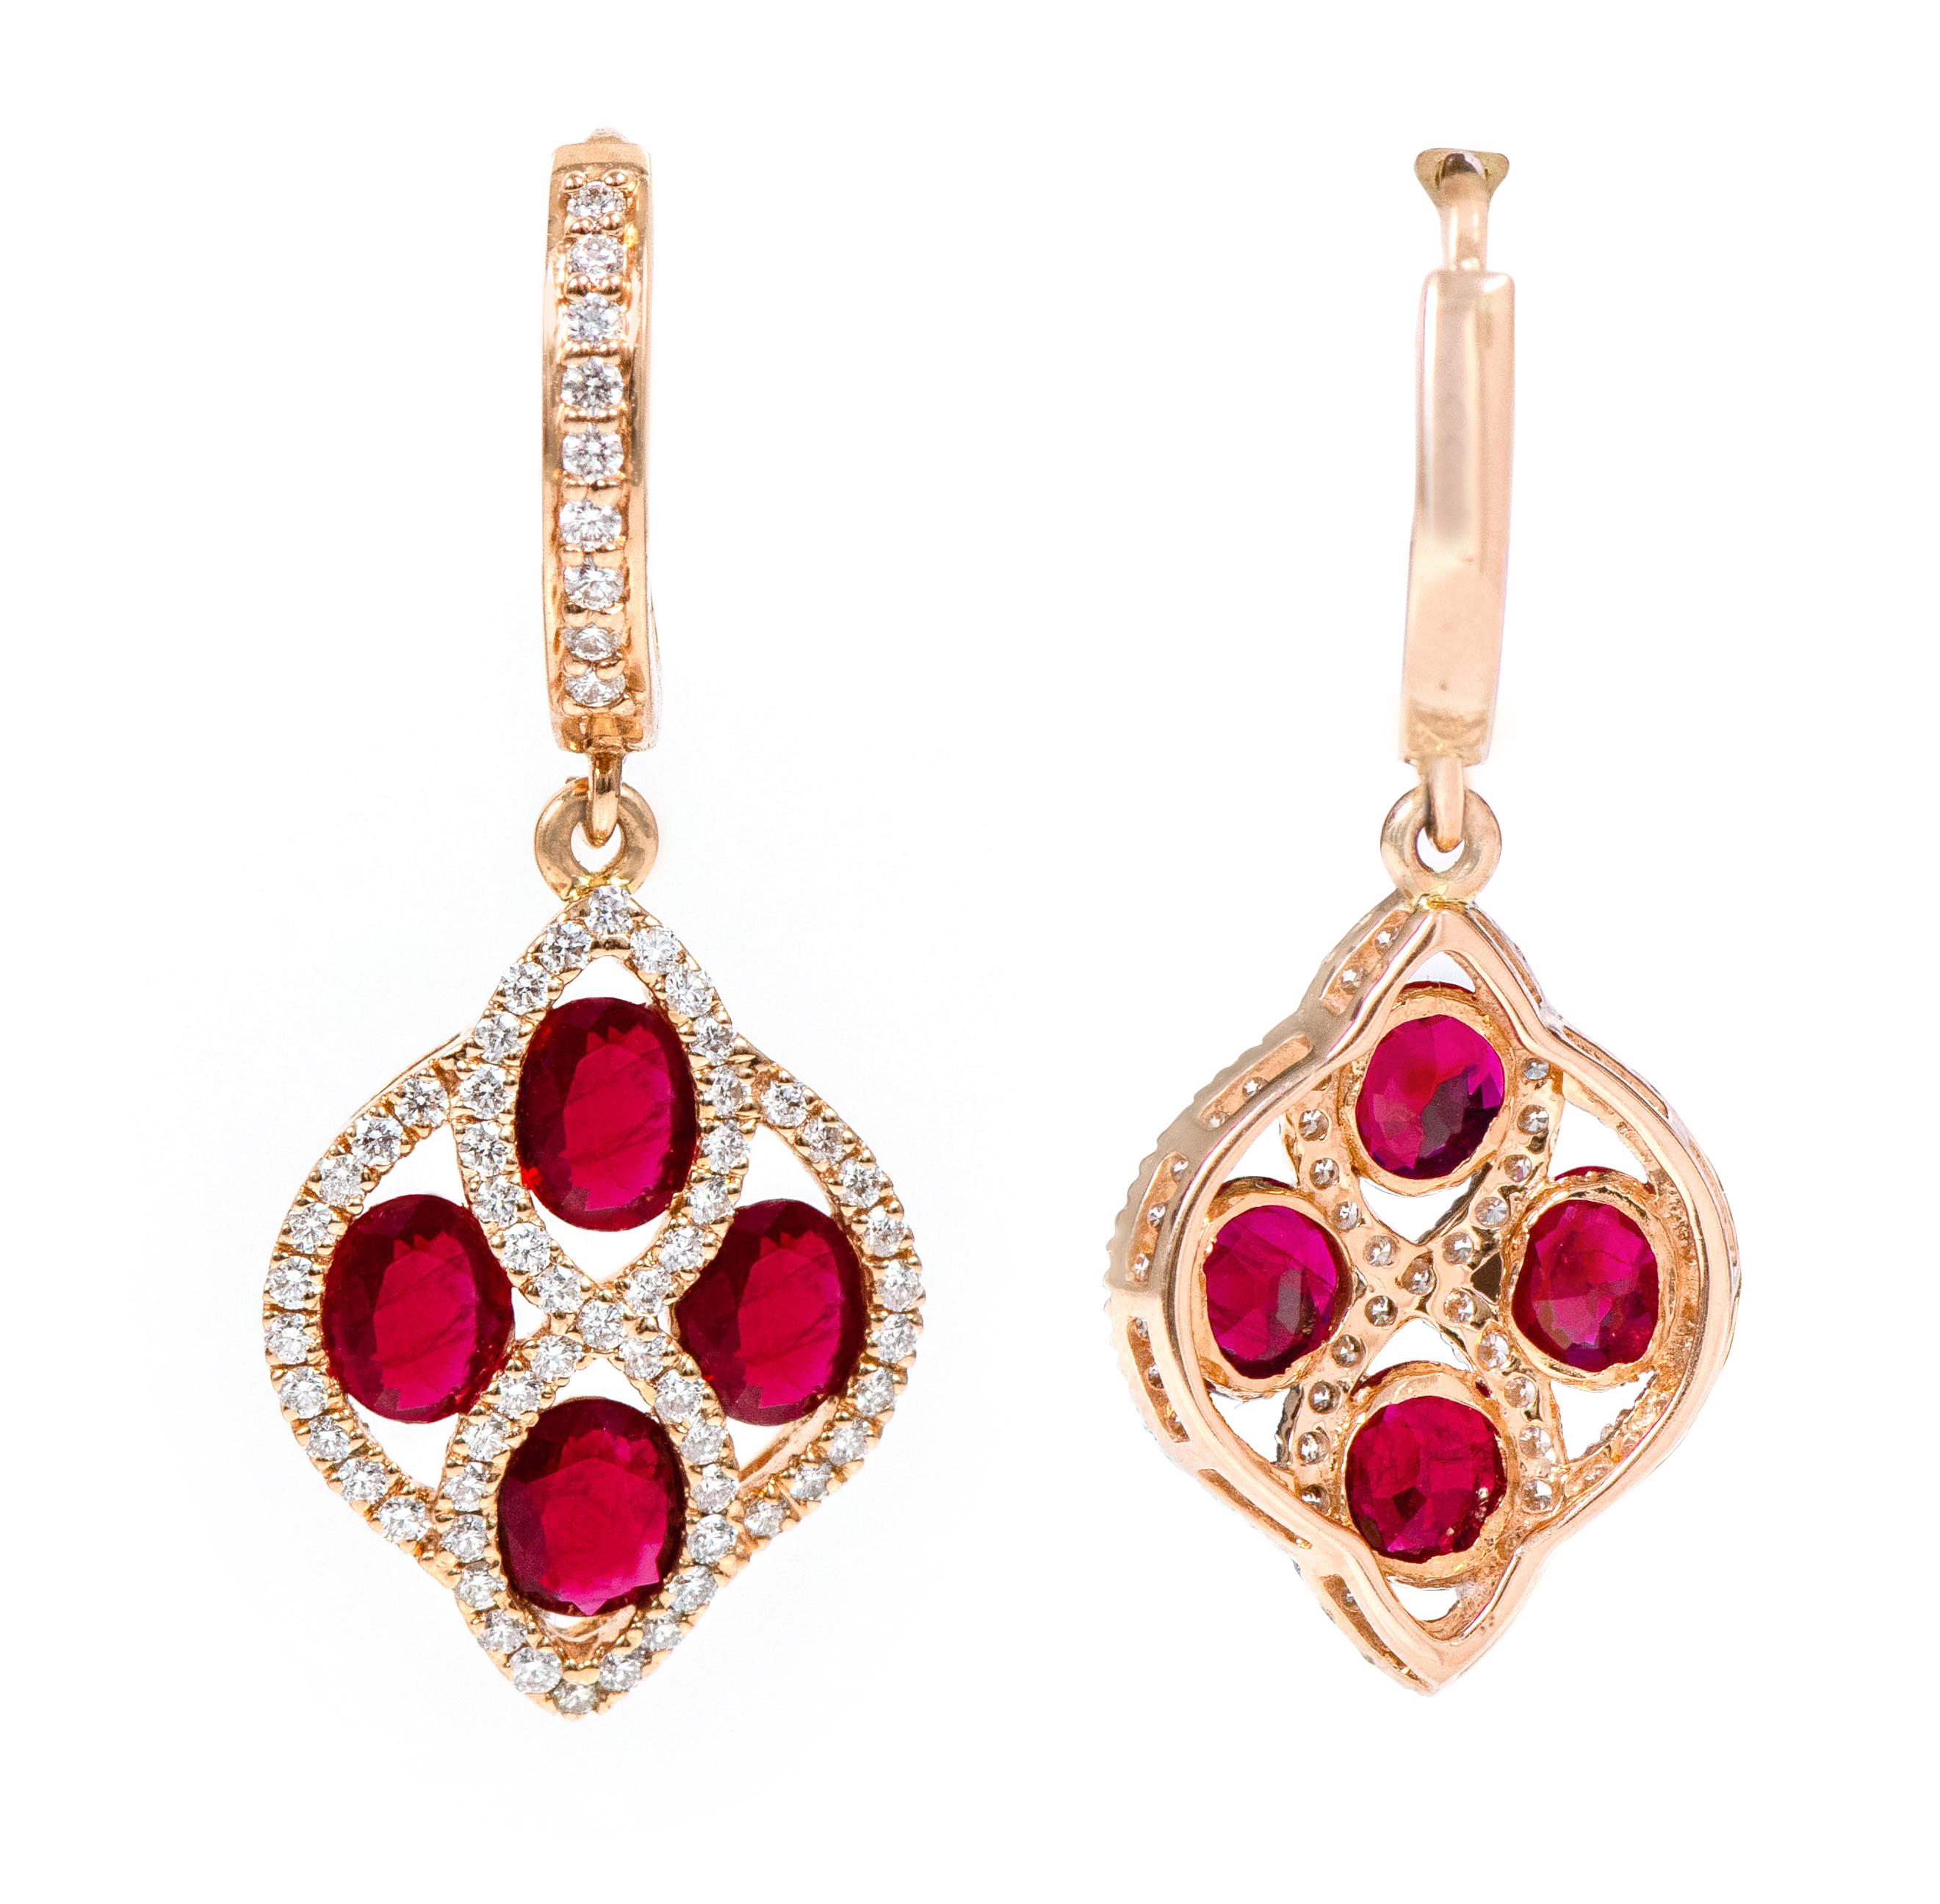 18 Karat Rose Gold 3.76 Carat Ruby and Diamond Dangle Earrings

This impressive scarlet red ruby and diamond hanging earring is incredible. The bottom overall kite shape formed with the beautiful designer element crafted to perfection with the